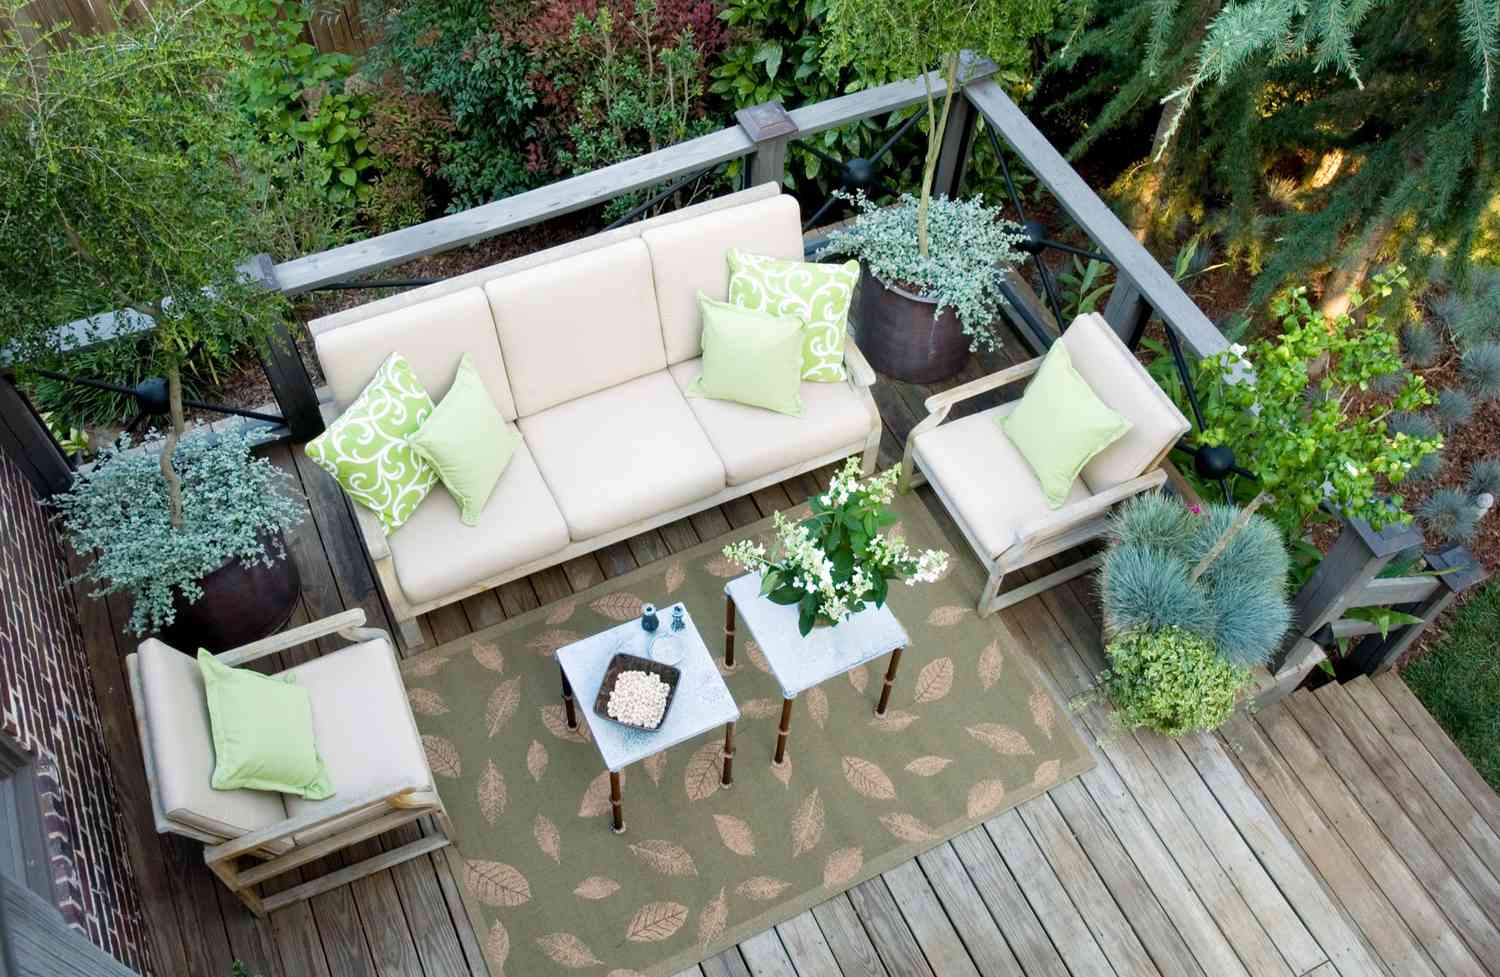 Top Recommendations for Buying Outdoor Furniture